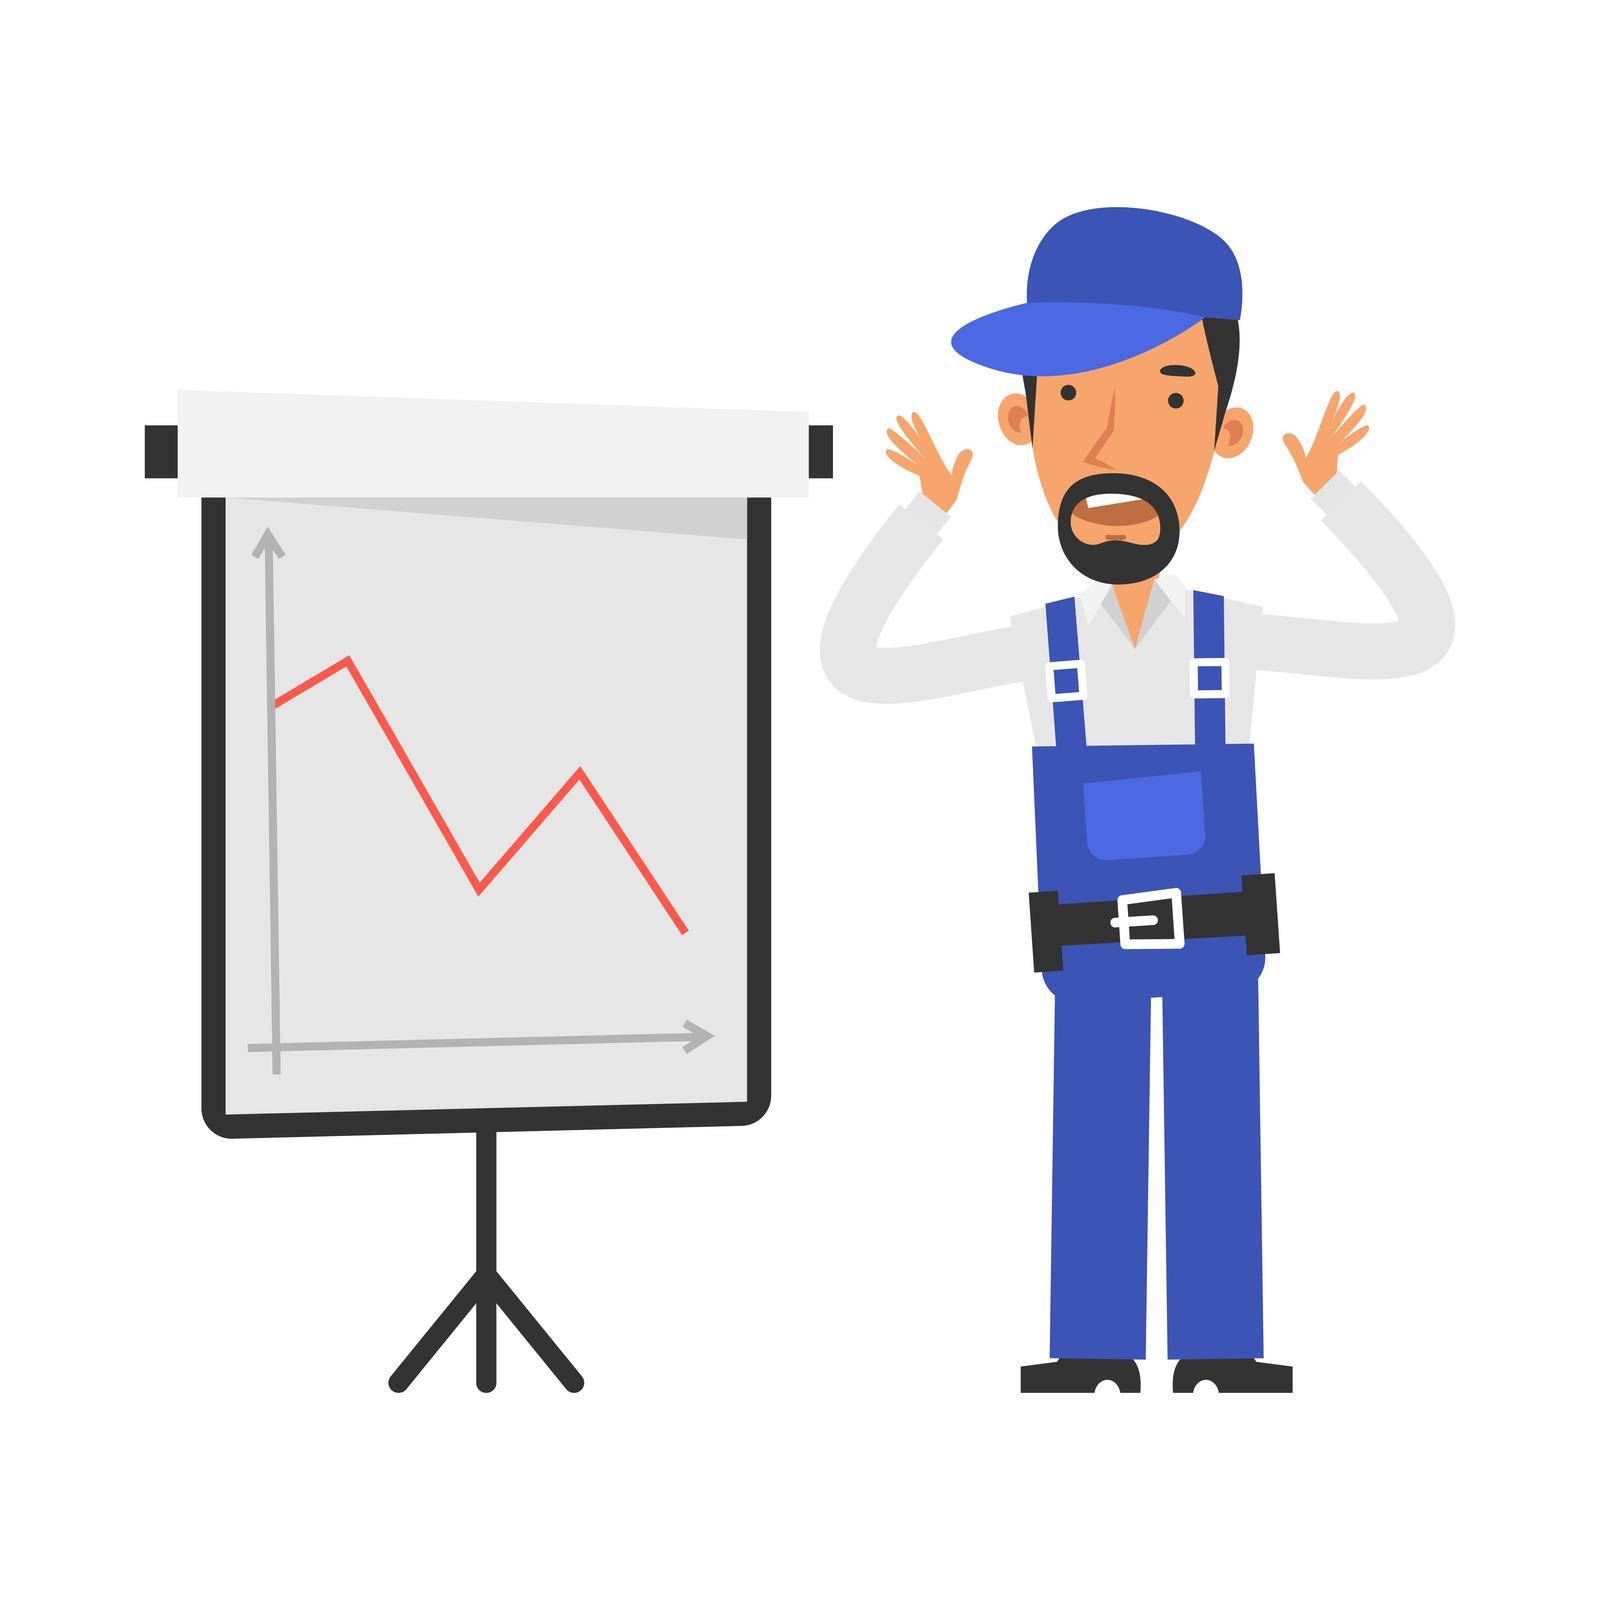 Business graph with negative indicator. Repairman not happy and scared. Vector characters by yuriytsirkunov